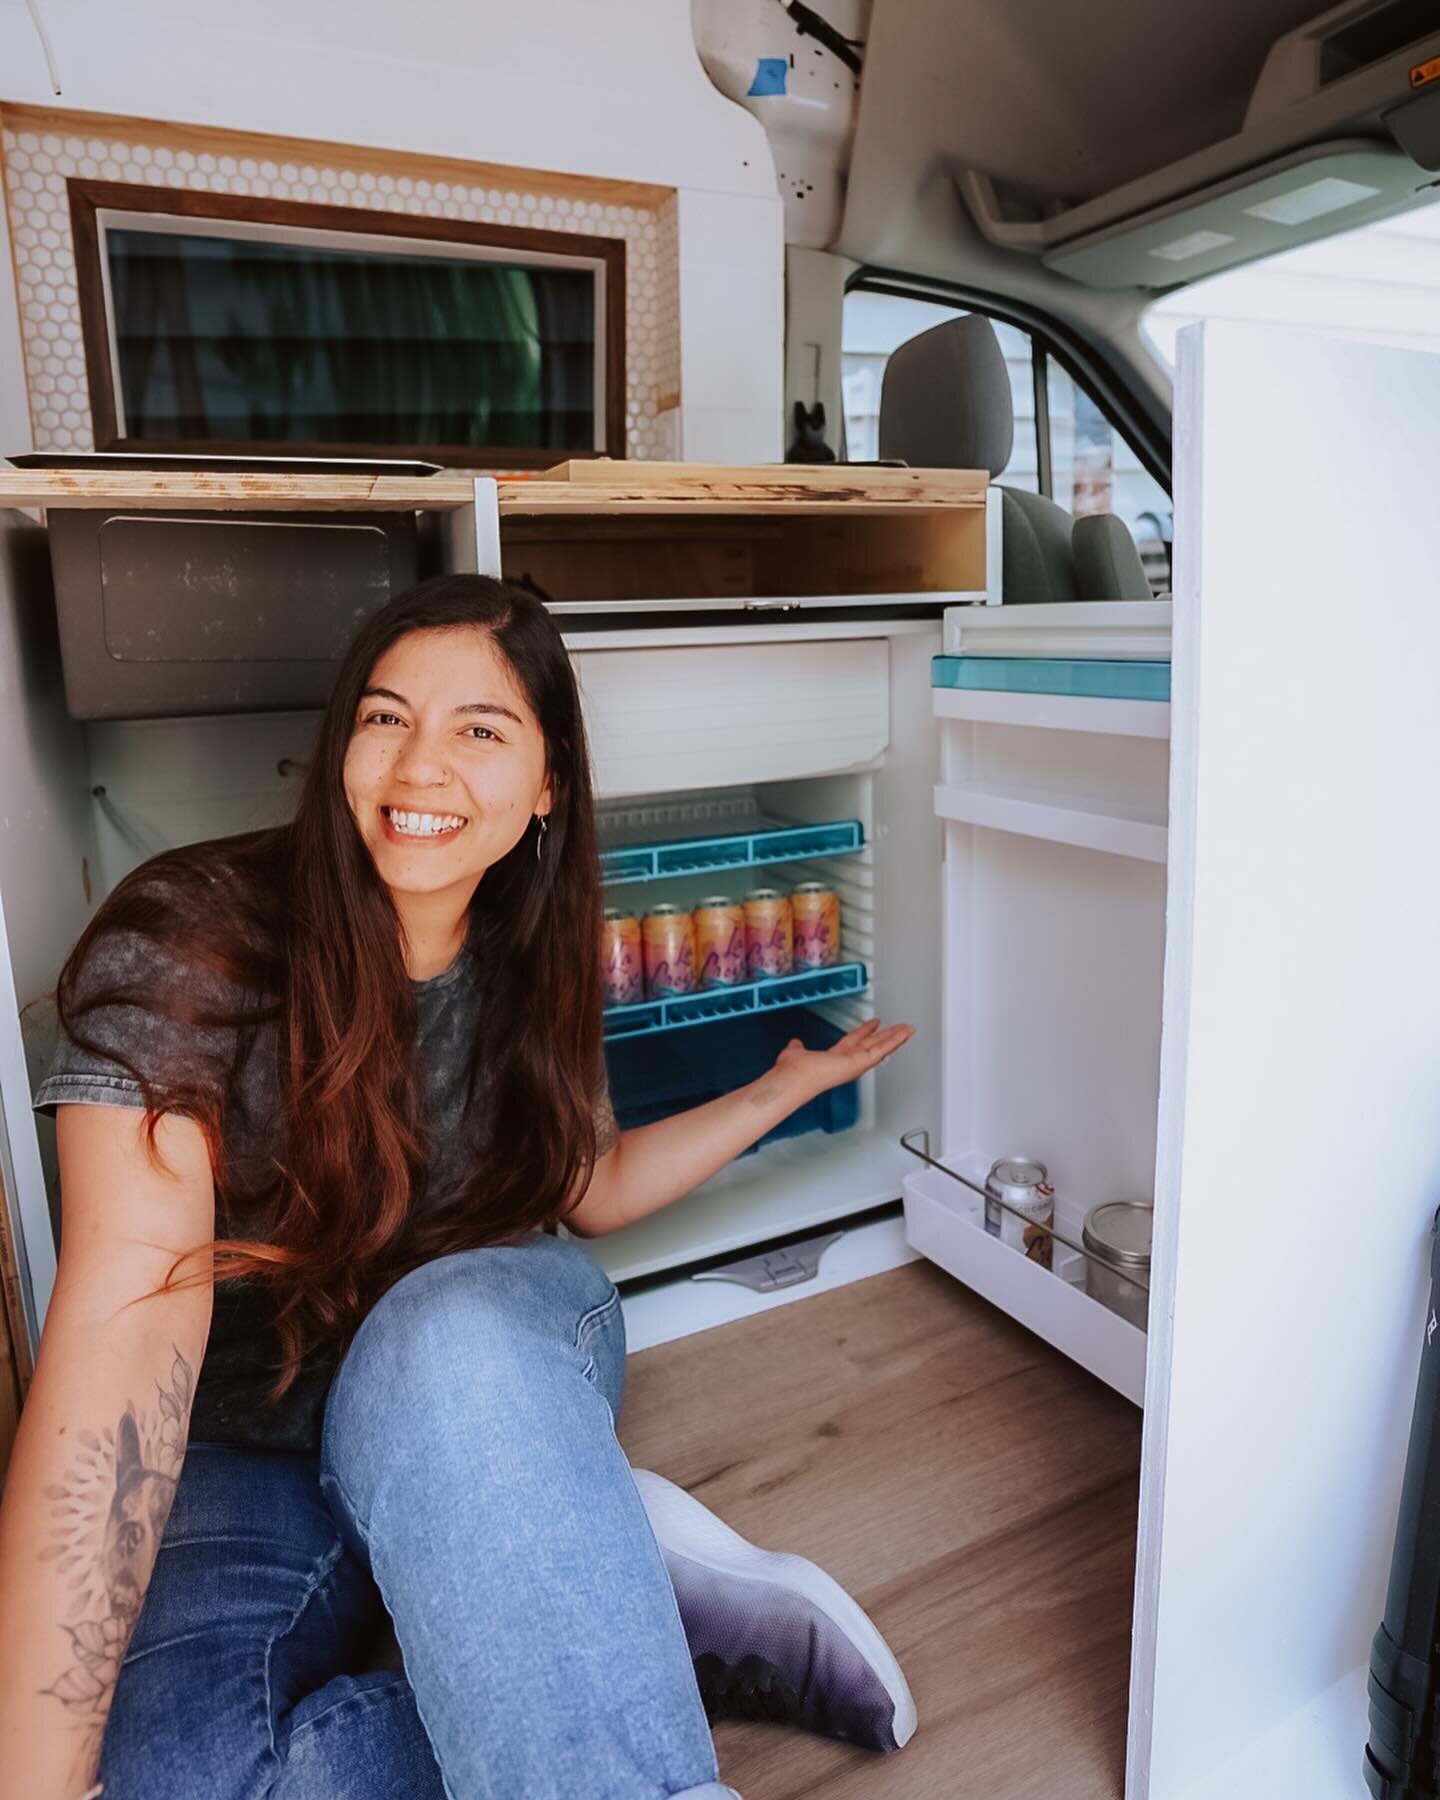 Living the life with our new off grid @dometic refrigerator. Been dreaming about filling it up with some @lacroixwater for so long! Woooohooo! Life is good. 🪴 🌞 
.
.
#lacroix #lacroixwater #dometic #dometicfridge #fordtransitconversion #diyvanconve